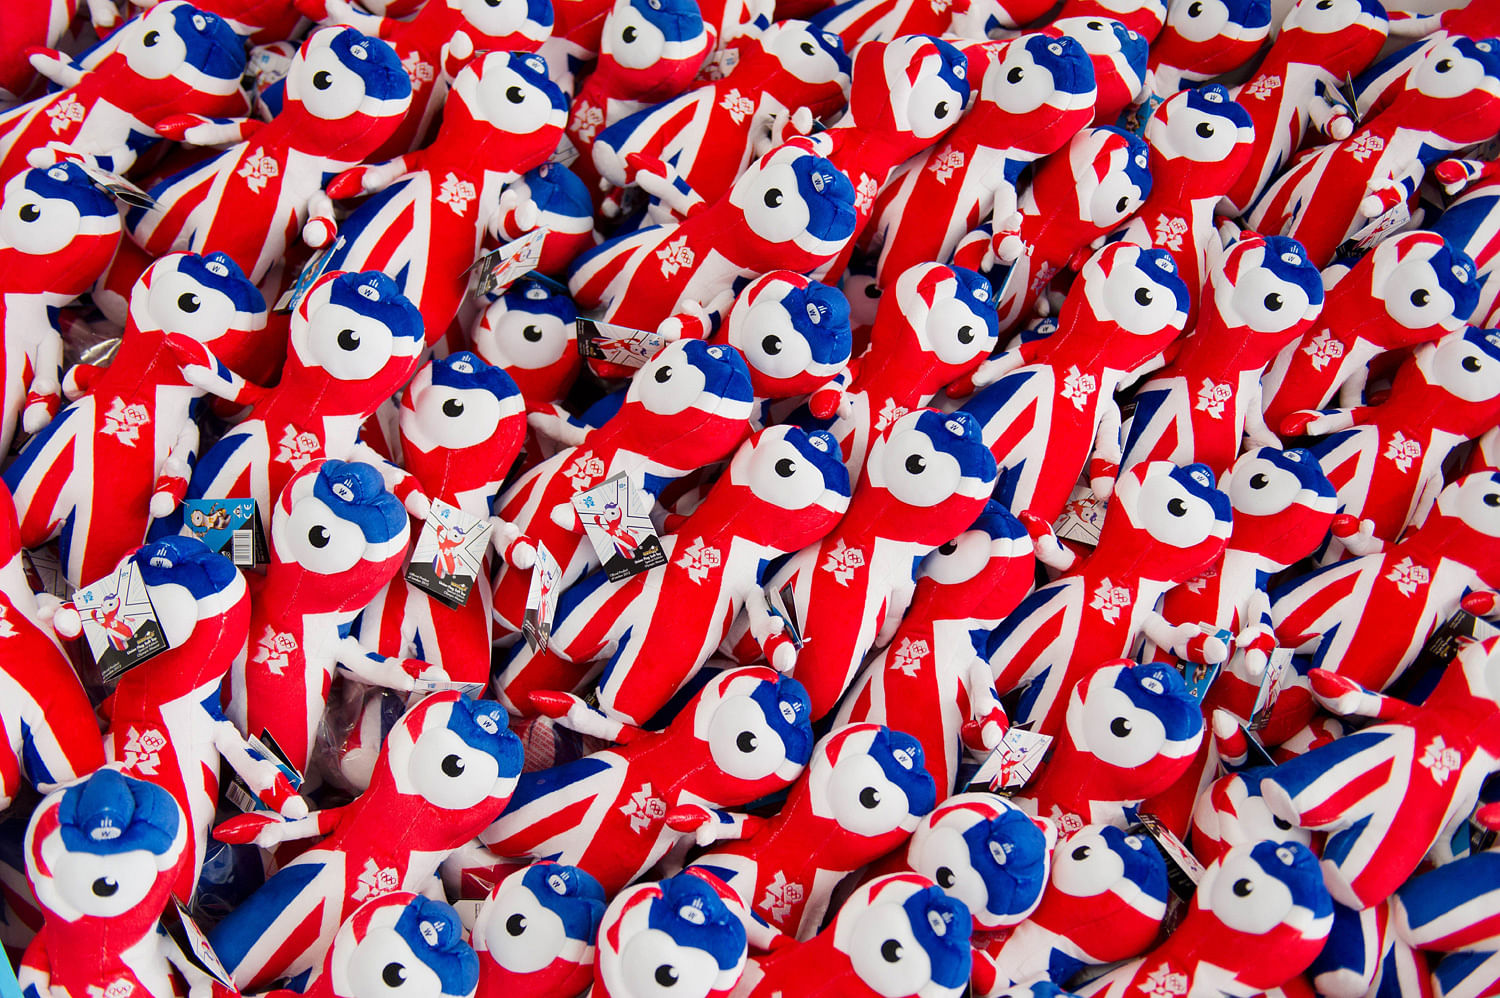 Stuffed toys of the Olympic mascot are stacked in one of the stores inside the Olympic Village where athletes will live for the duration of the London 2012 Games in east London.AFP